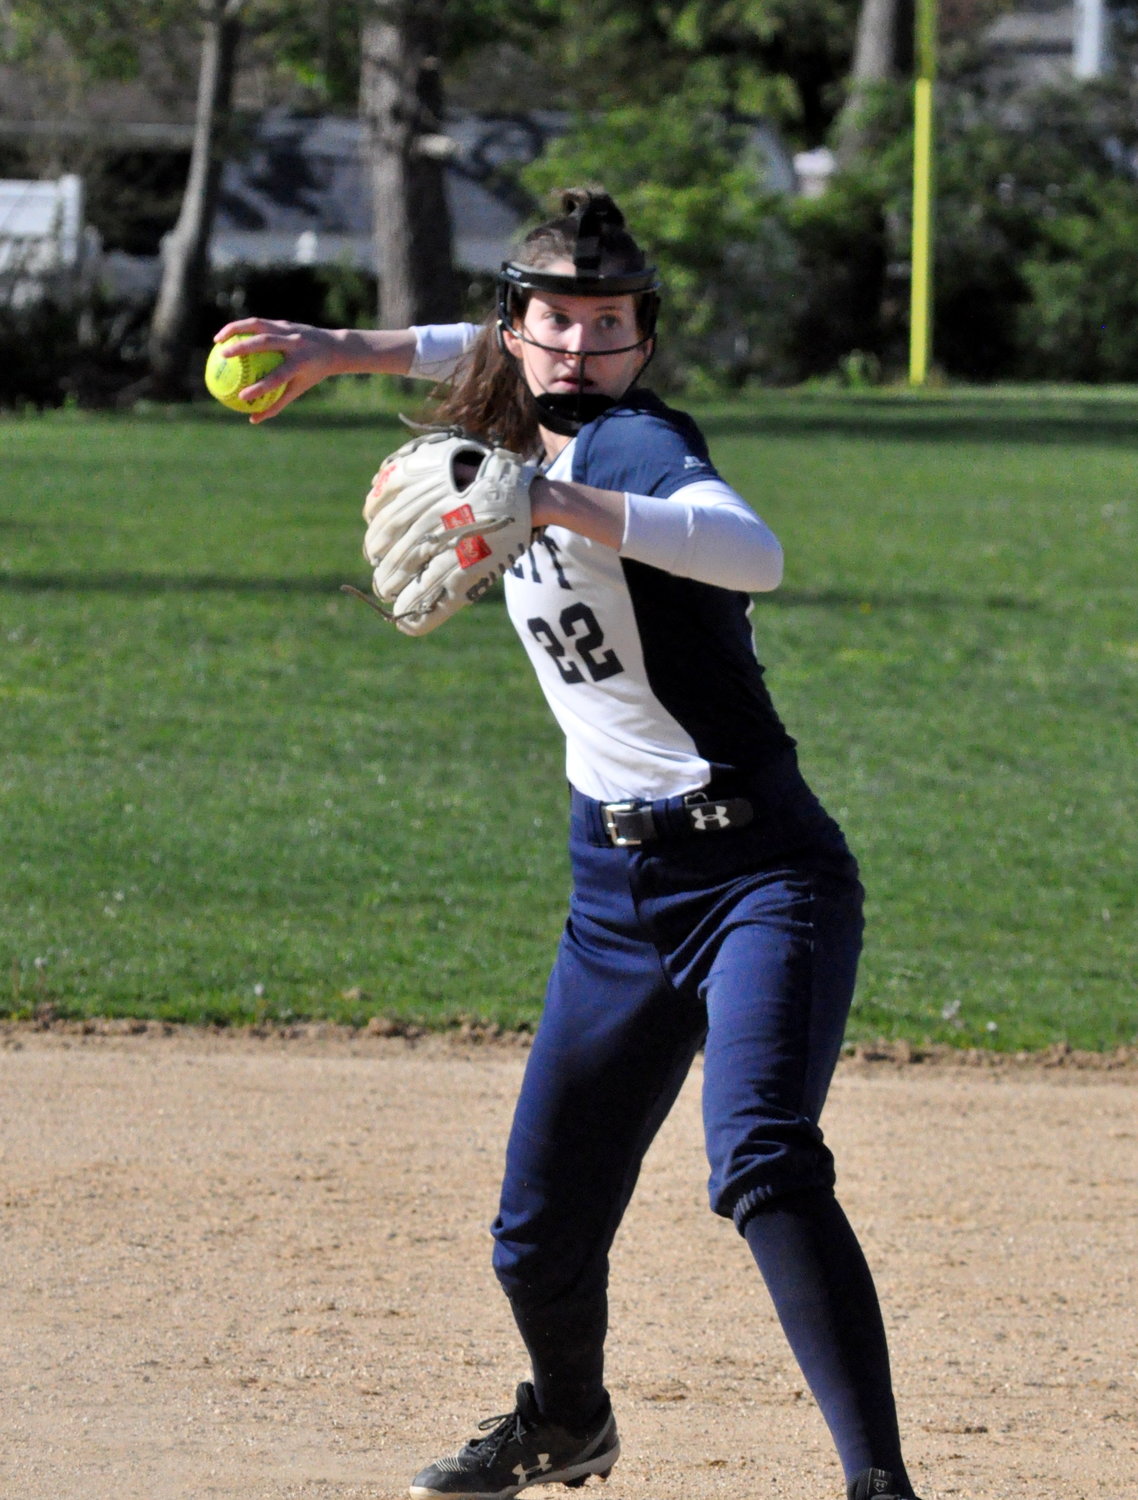 Senior shortstop Molly Williams had clutch hits in the sixth and seventh innings Monday as the Bulldogs beat West Hempstead, 10-9.